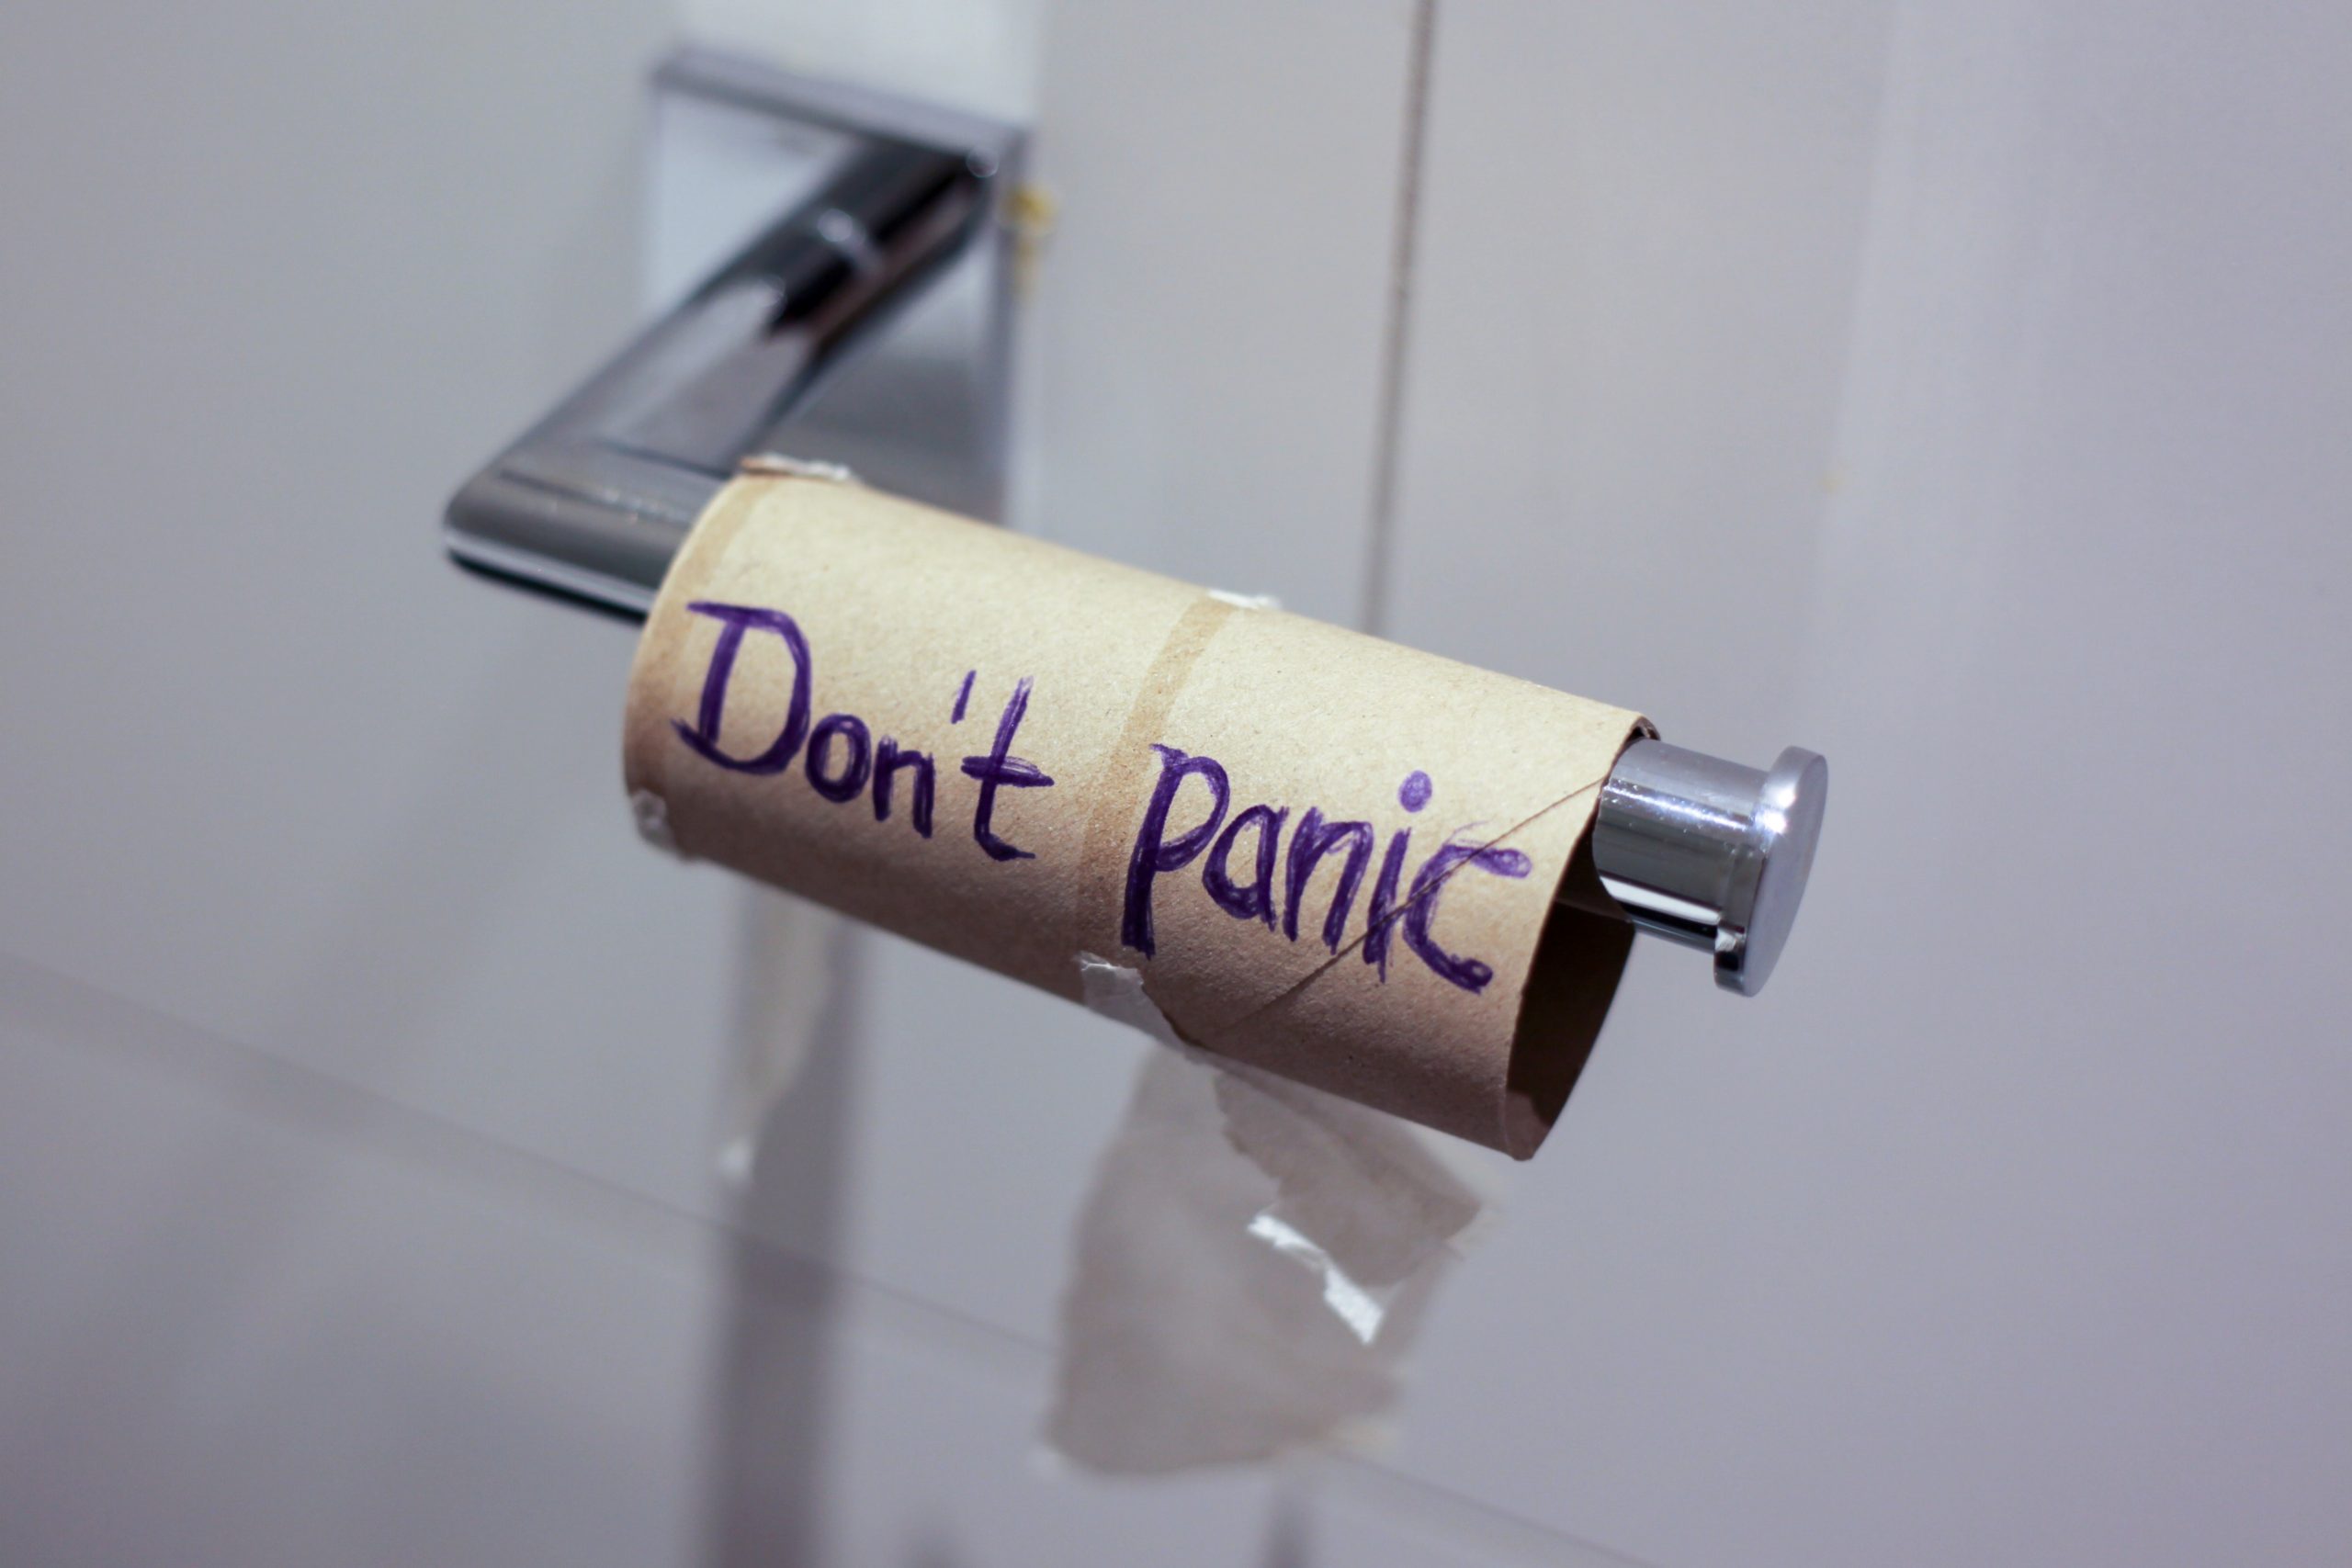 Don't panic toilet paper roll signifying next steps